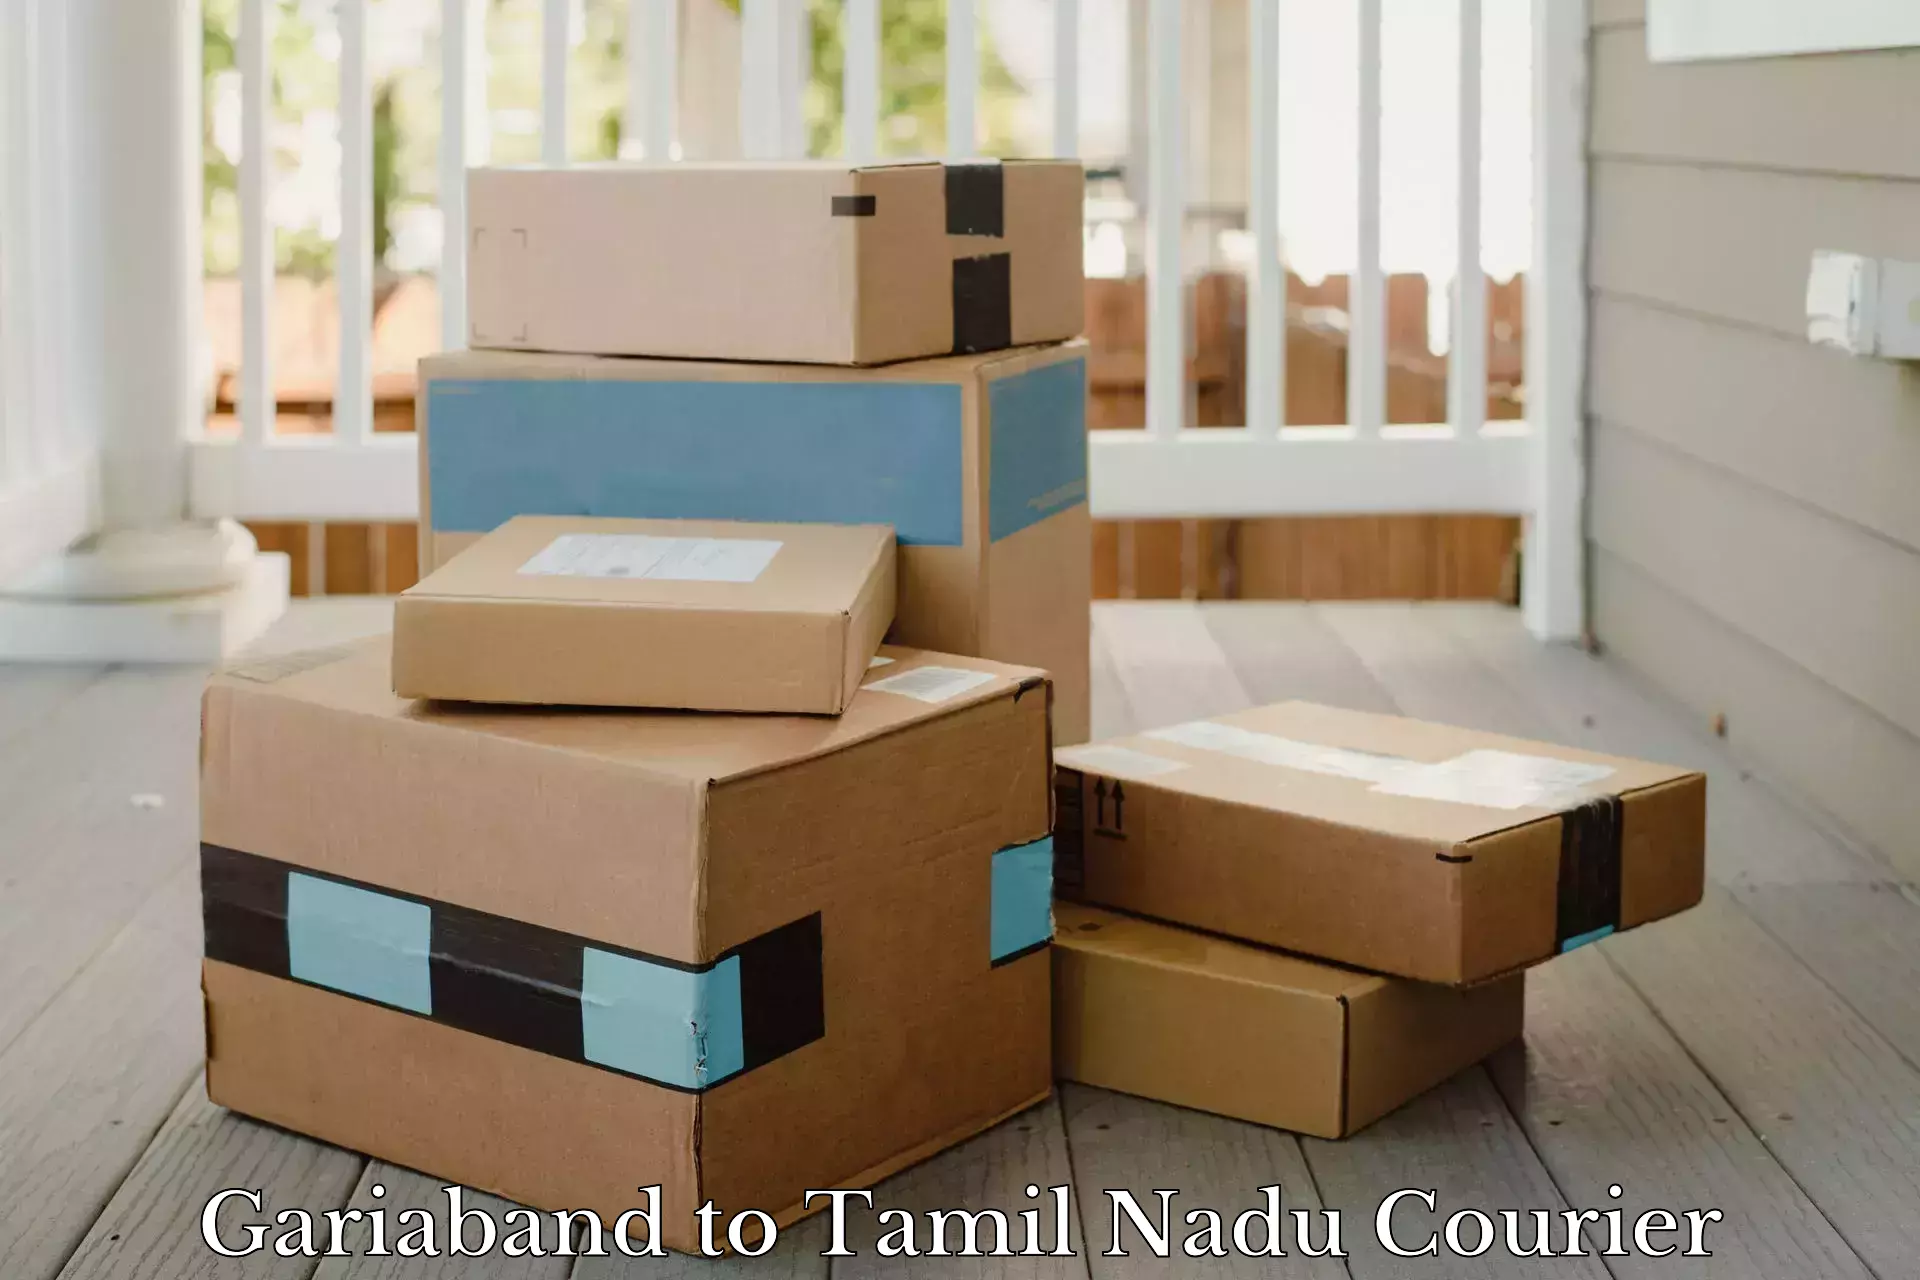 Overnight delivery services Gariaband to Tamil Nadu